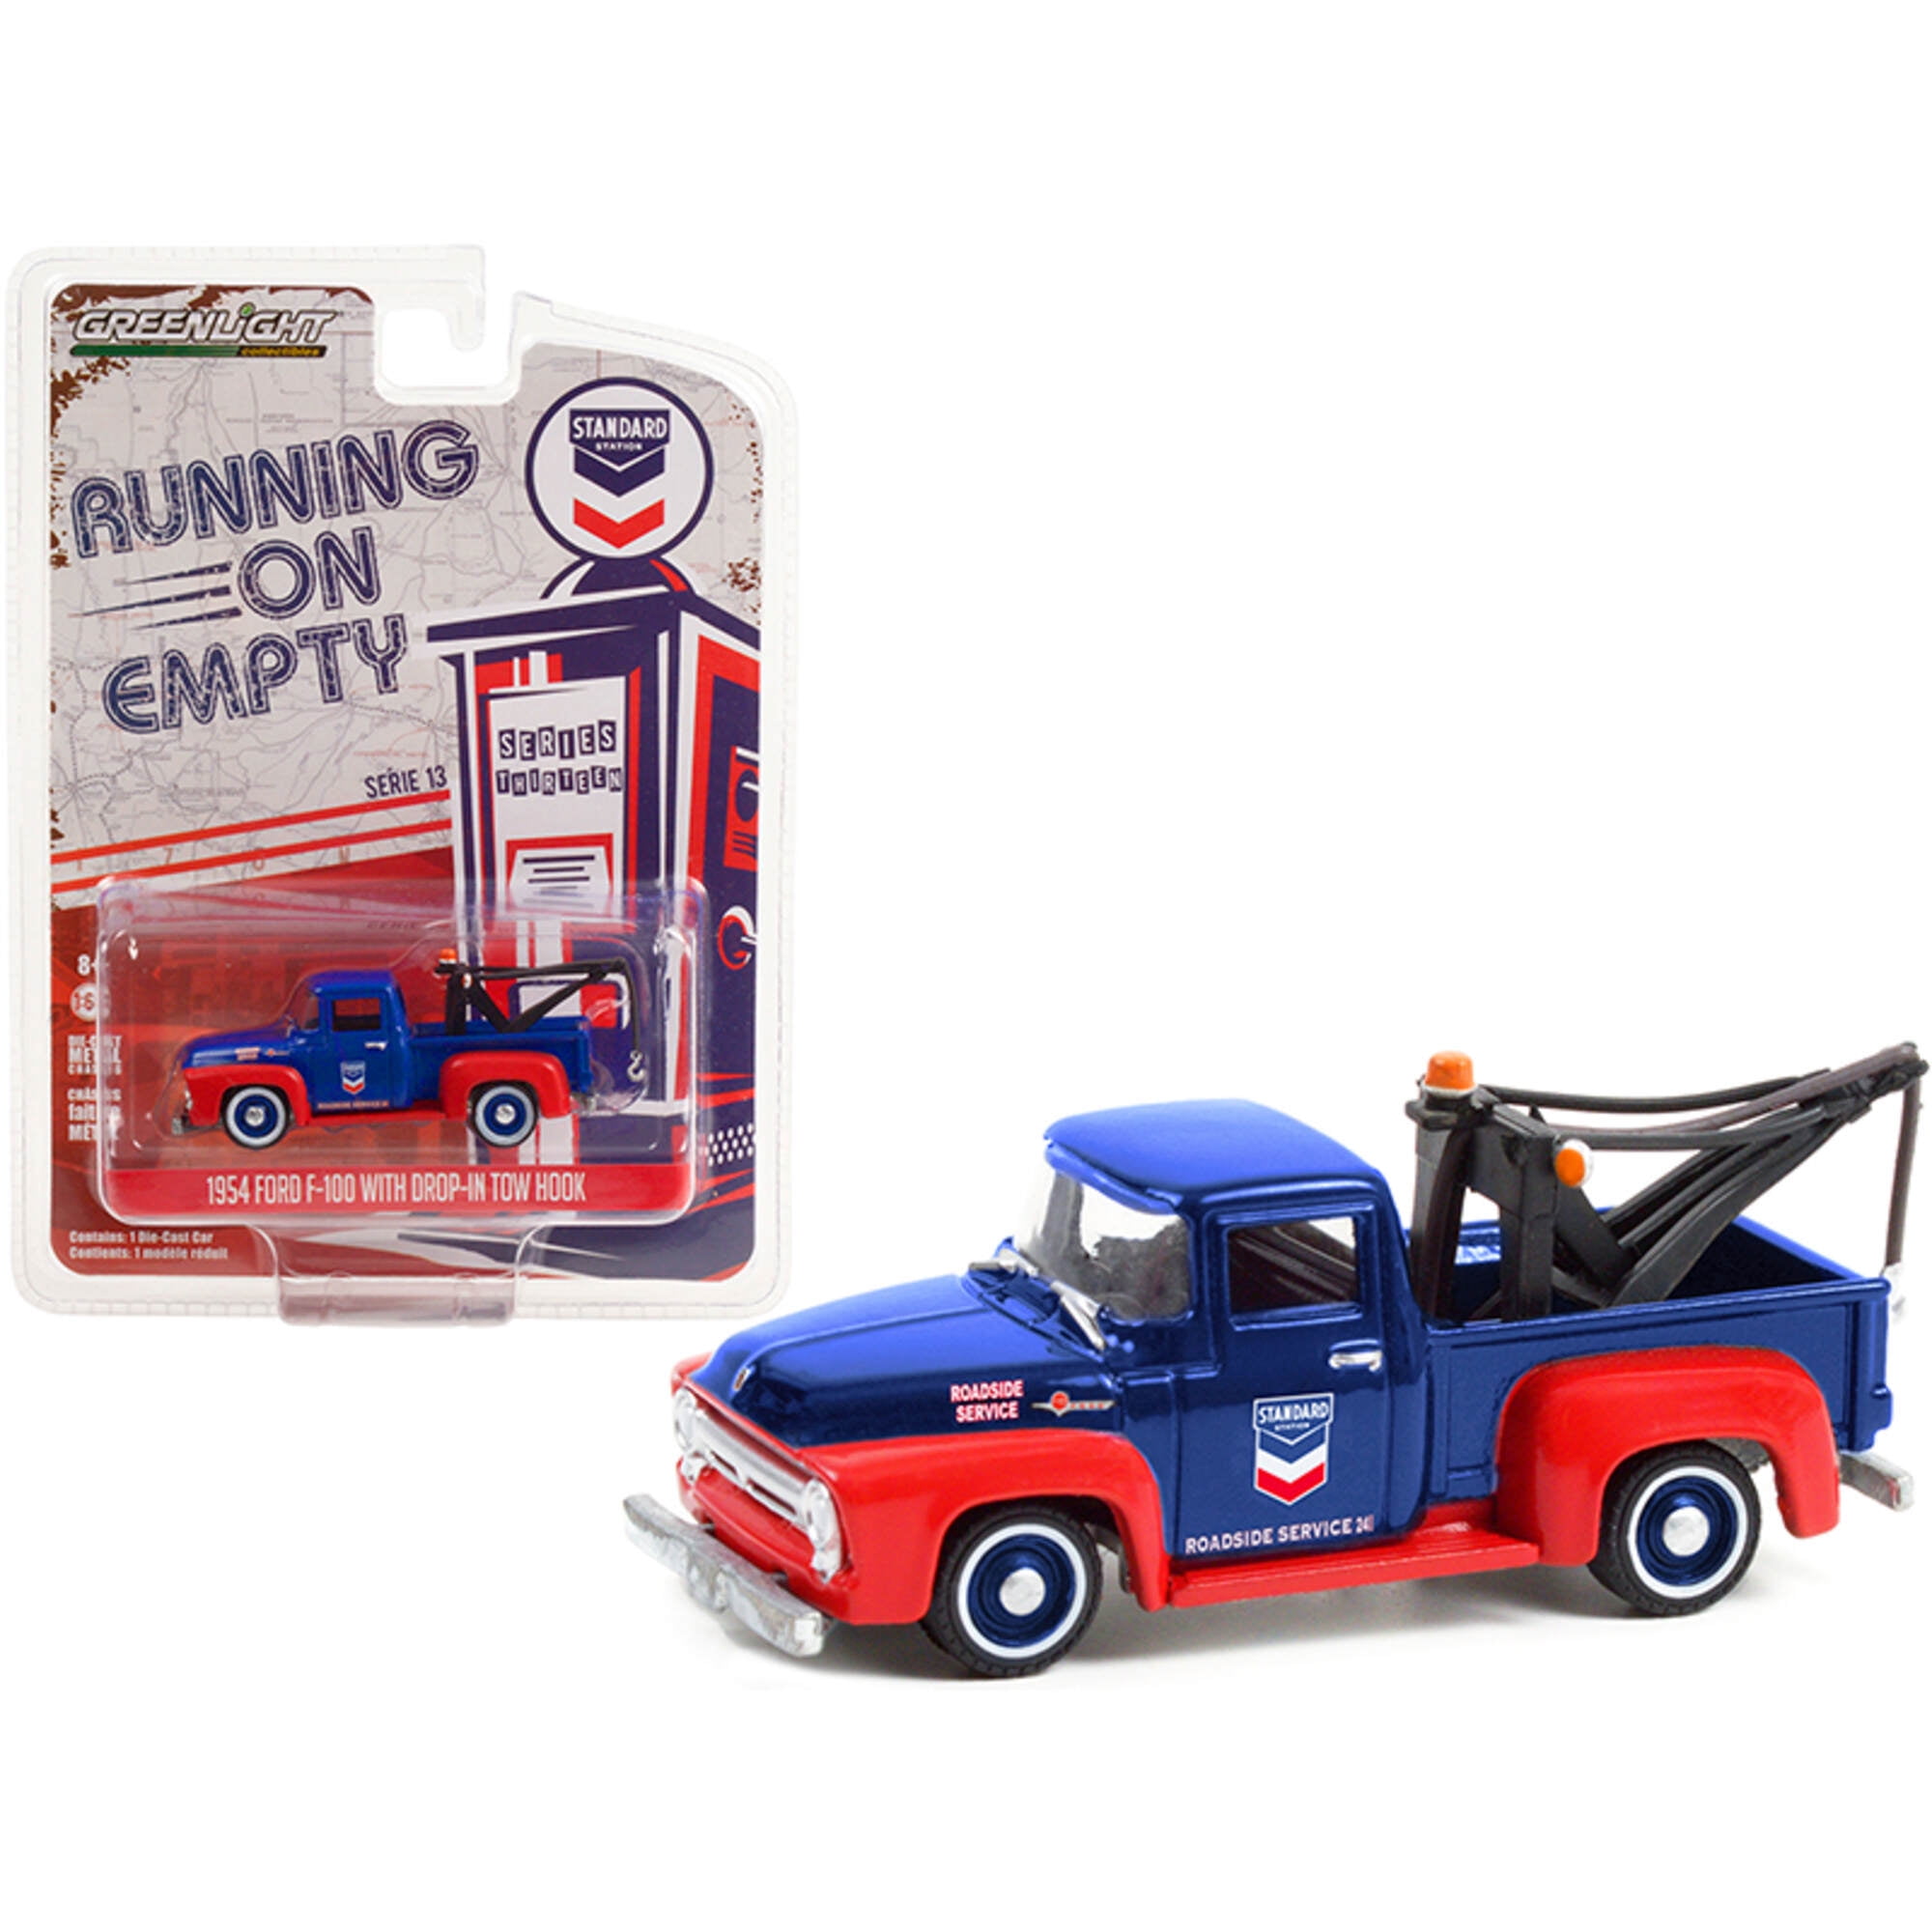 2.75 x 2 in. 1-64 Scale 1954 Ford F-100 Tow Truck with Drop-in Tow Hook Standard Oil Running on Empty 13 Diecast Model Car, Blue & Matt Red -  GreenLight, 41130A